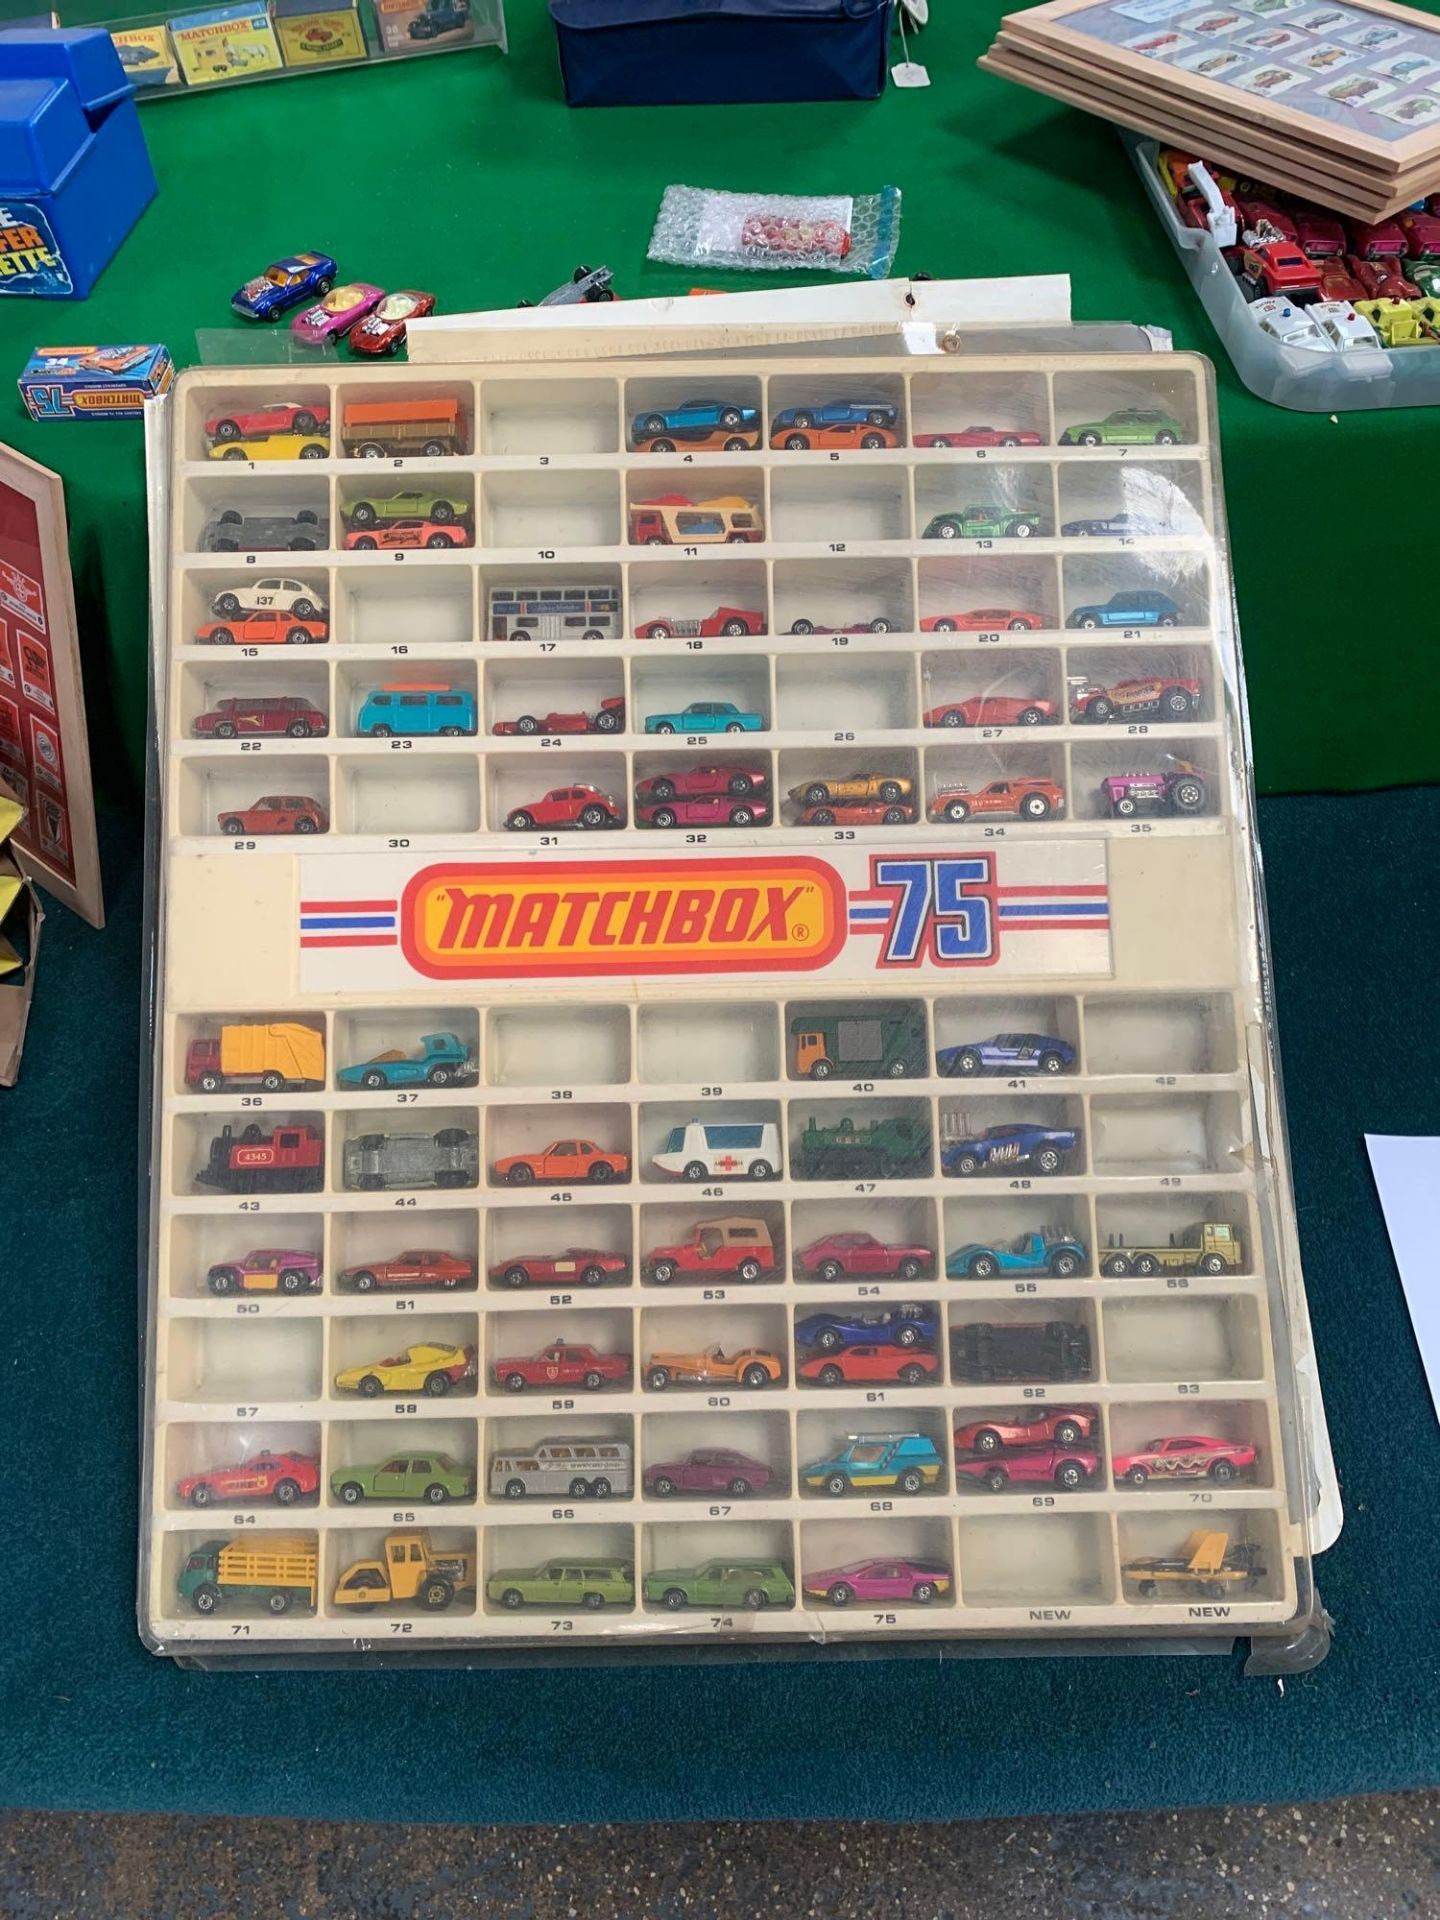 Matchbox 75 Set As Pictured Missing Car Numbers In Set 3 10 12 16 26 30 38 39 42 49 57 63